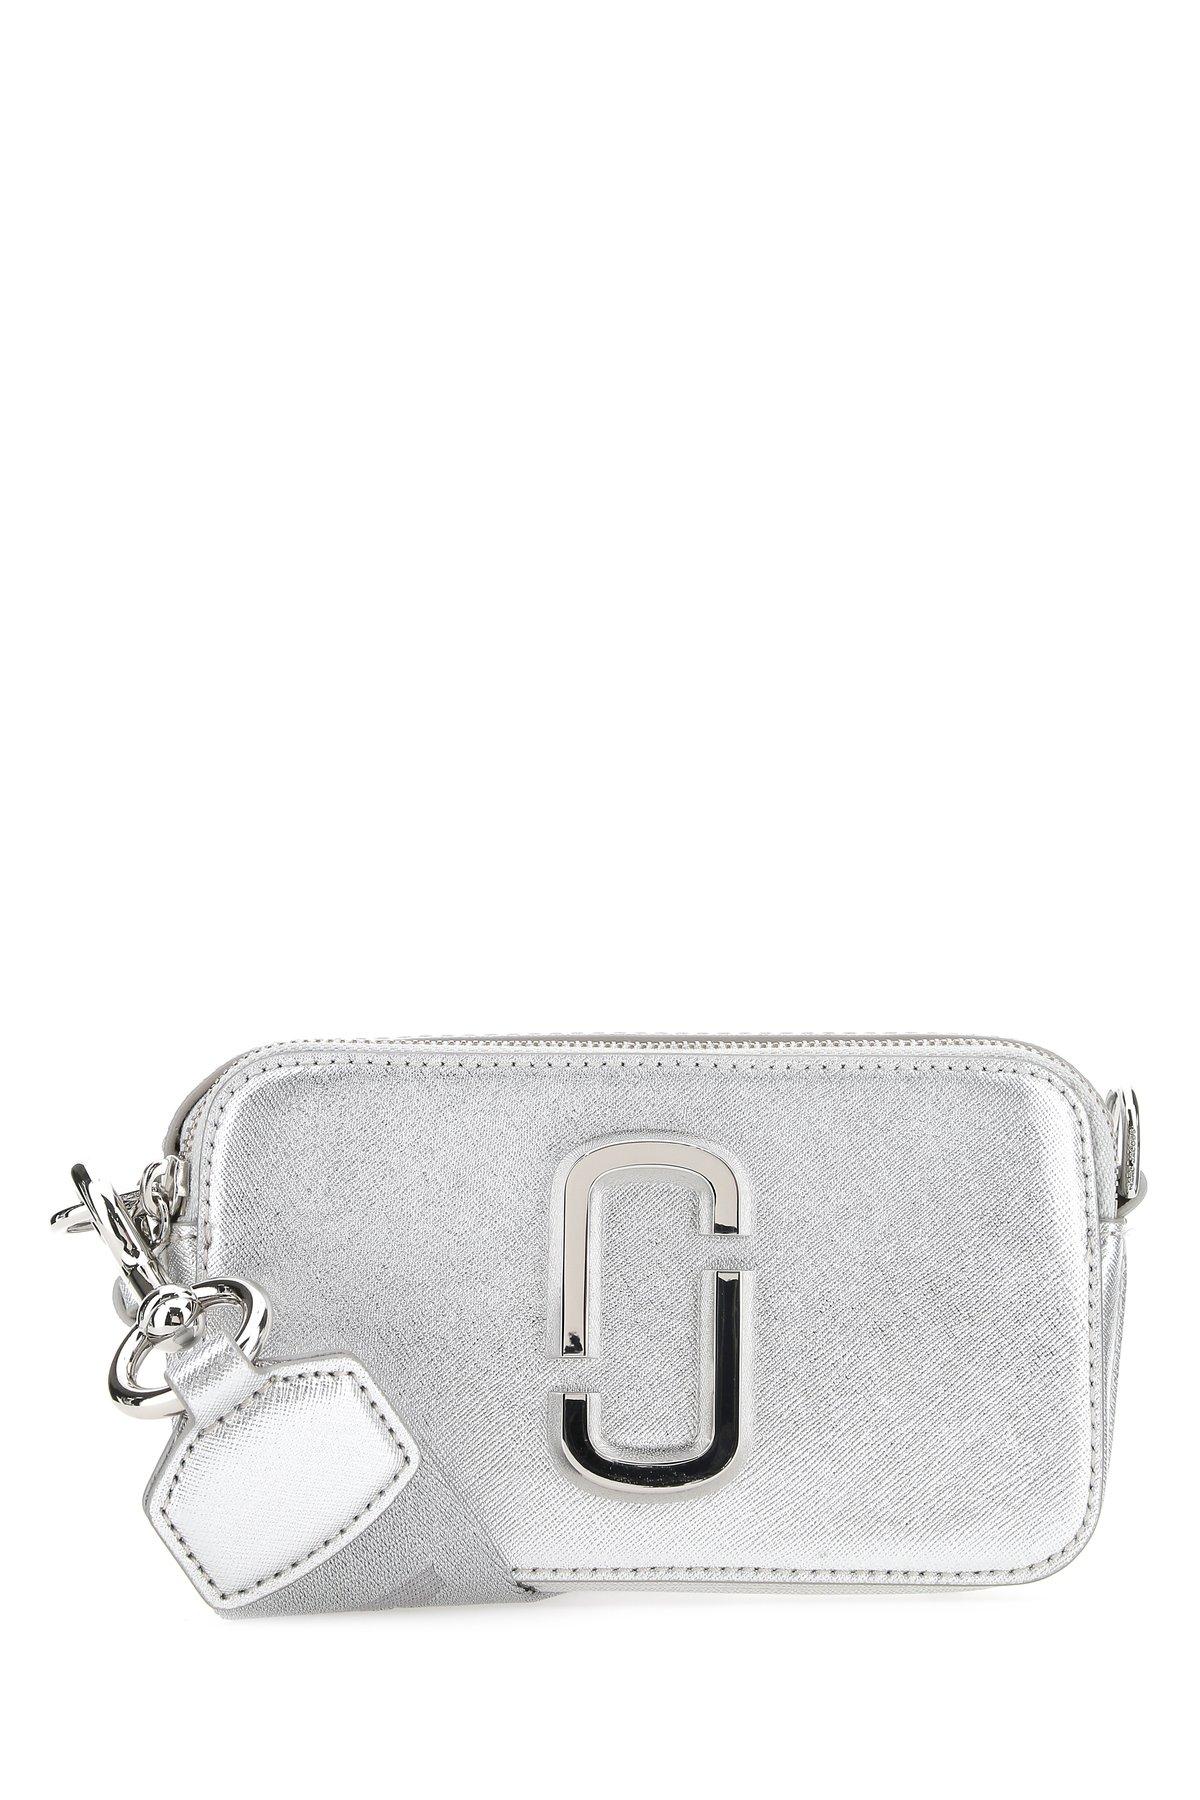 Marc Jacobs The Snapshot Dtm Camera Bag Grey Leather Pony-style